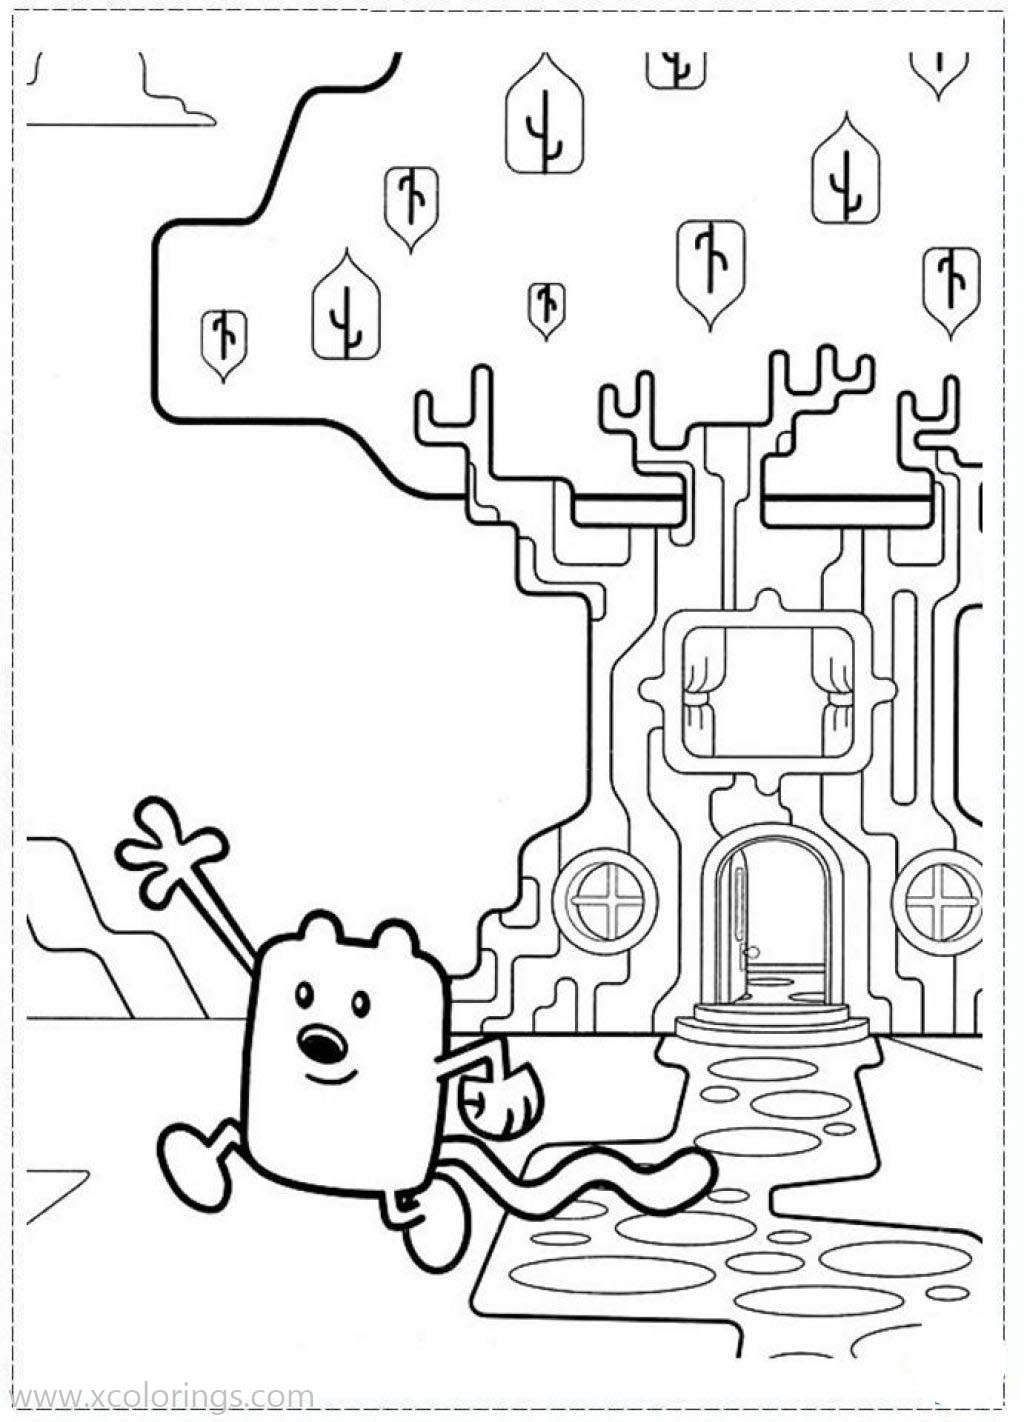 Free Wow Wow Wubbzy Coloring Pages Wubbzy Going Out printable